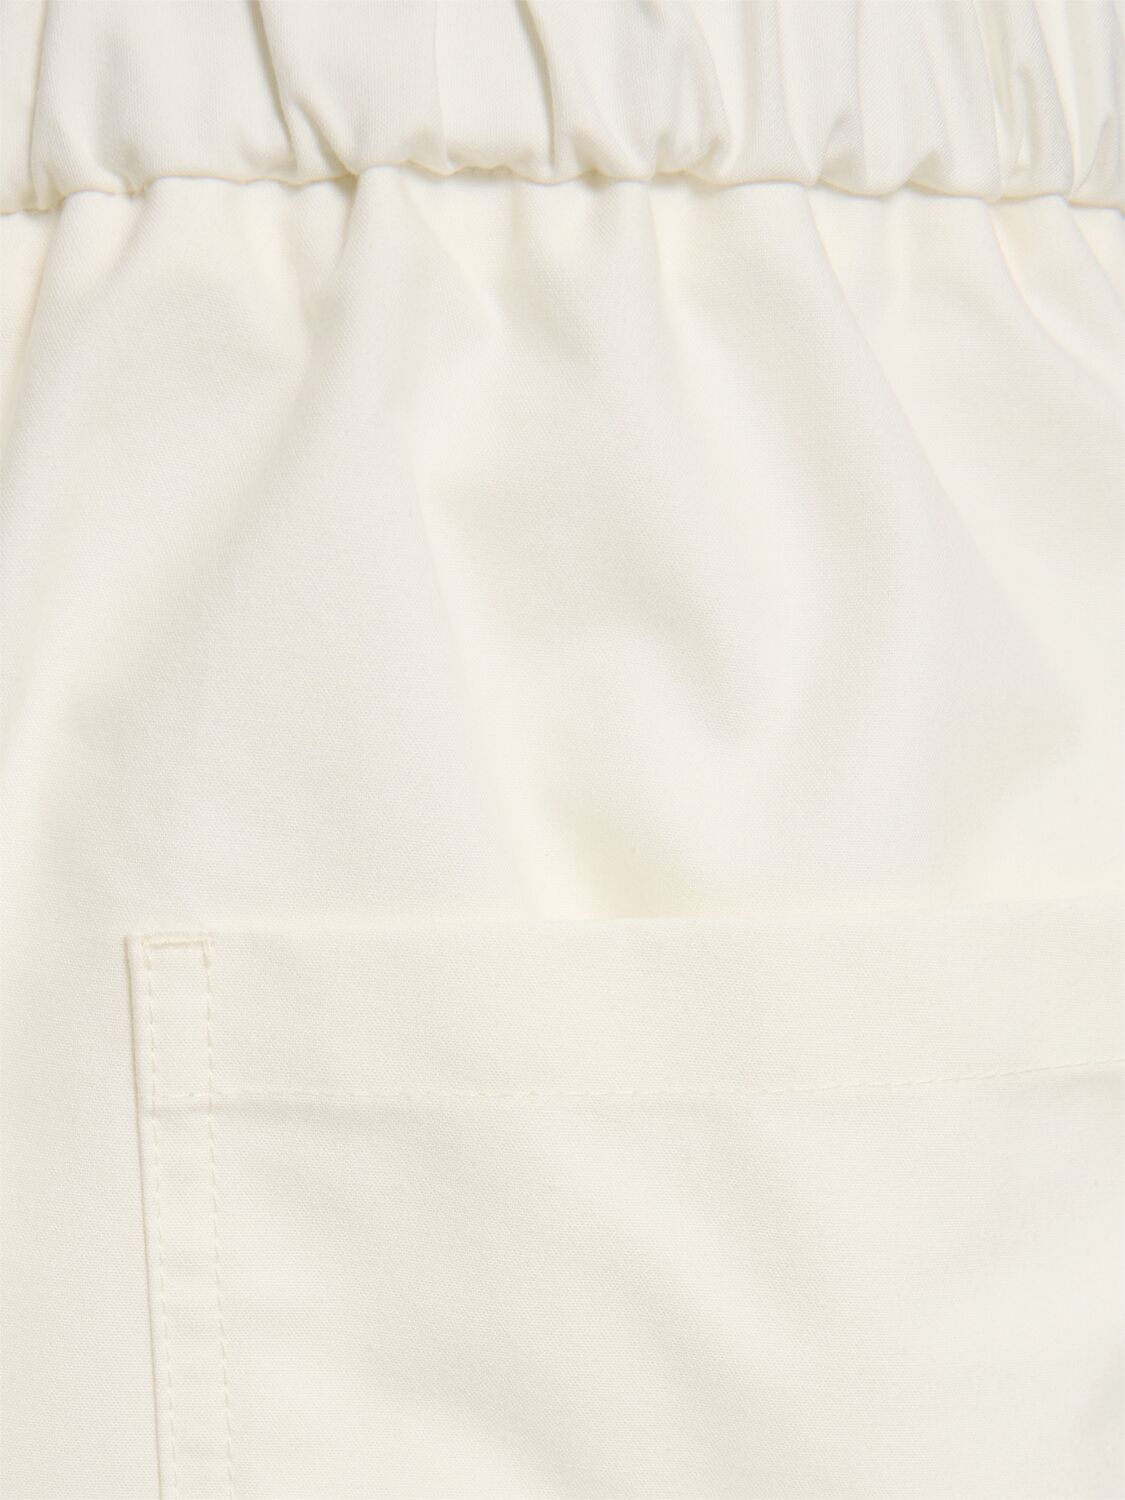 Shop Jil Sander Relaxed Fit Cotton Pants In Eggshell